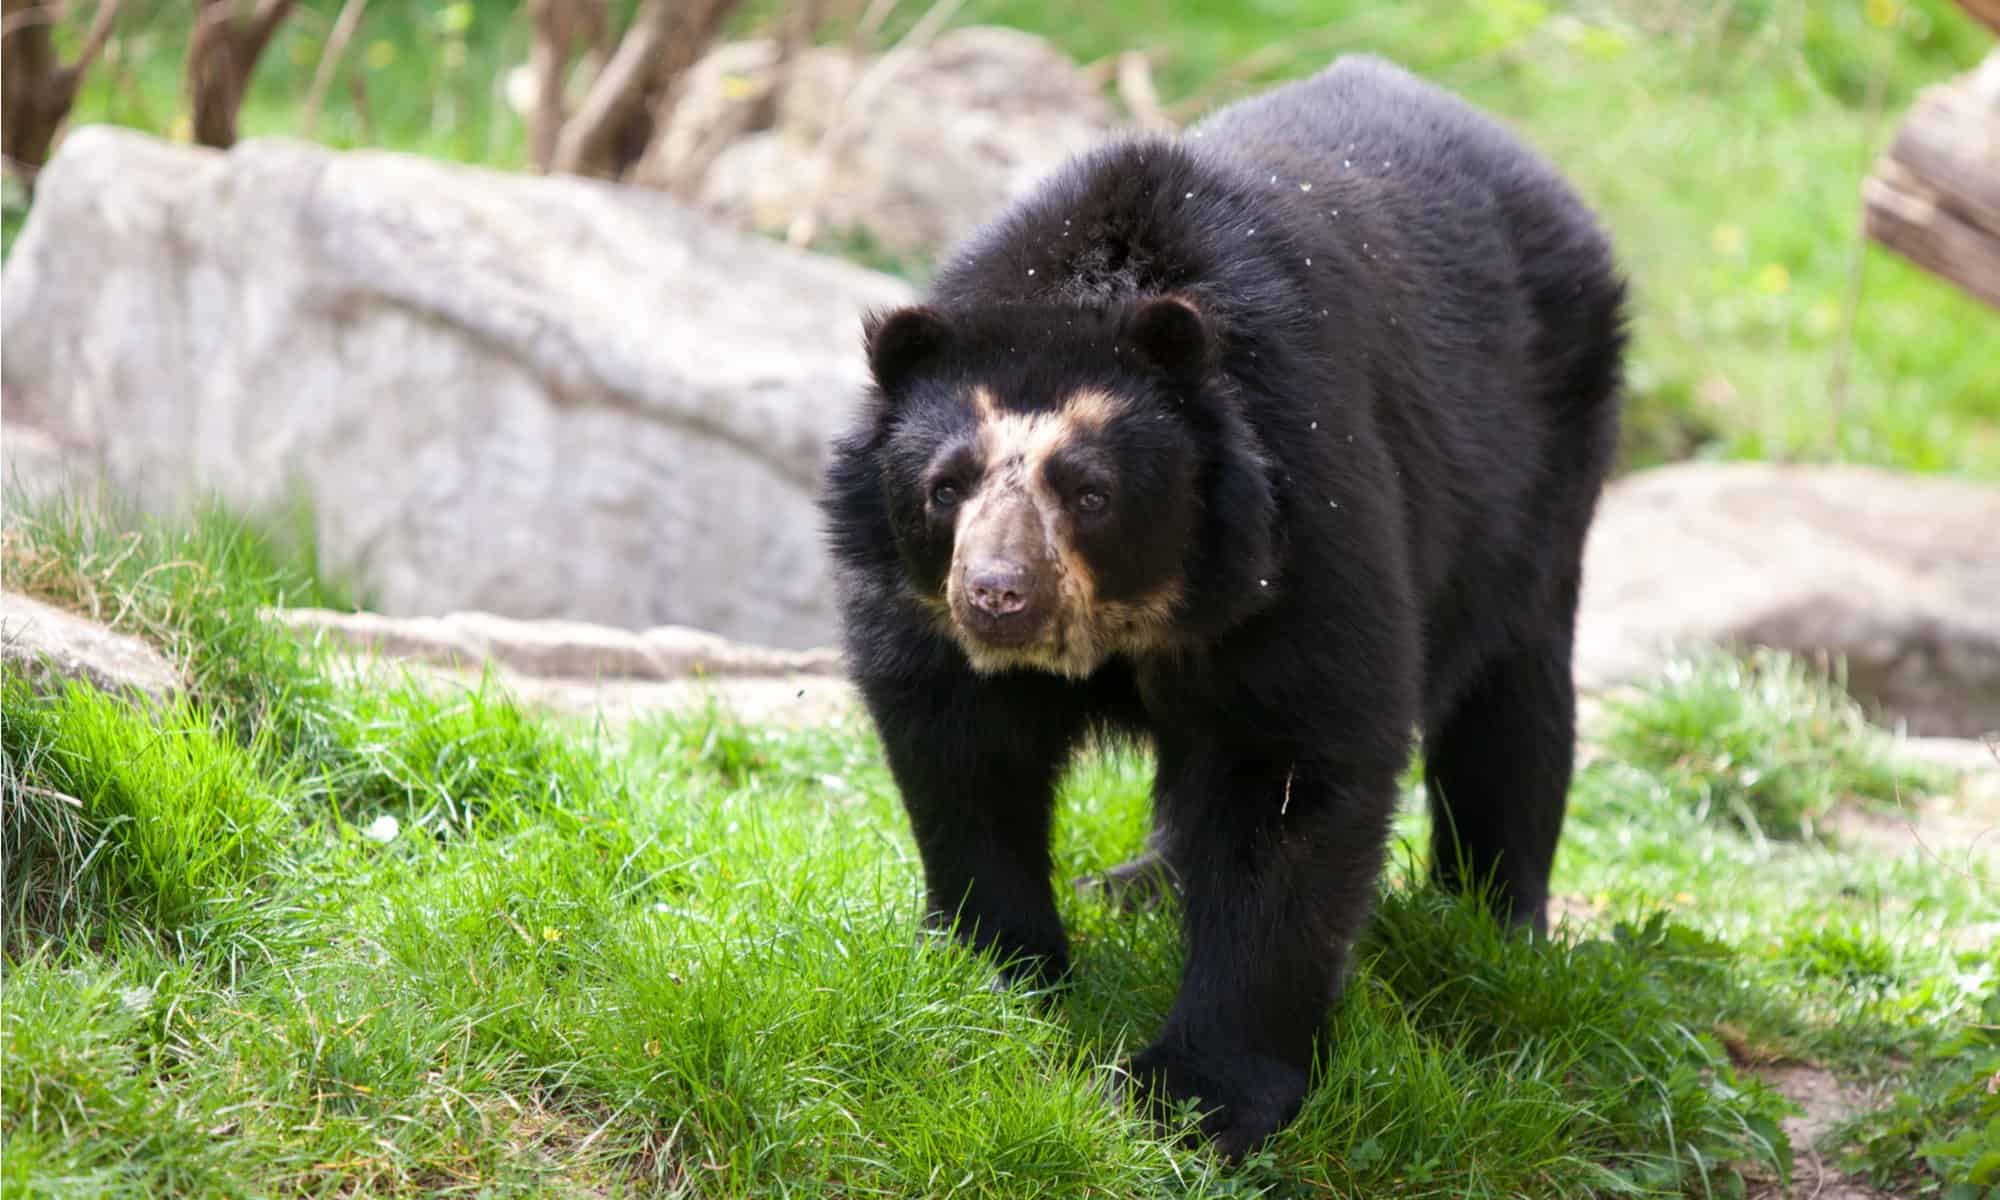 Spectacled bear on grass